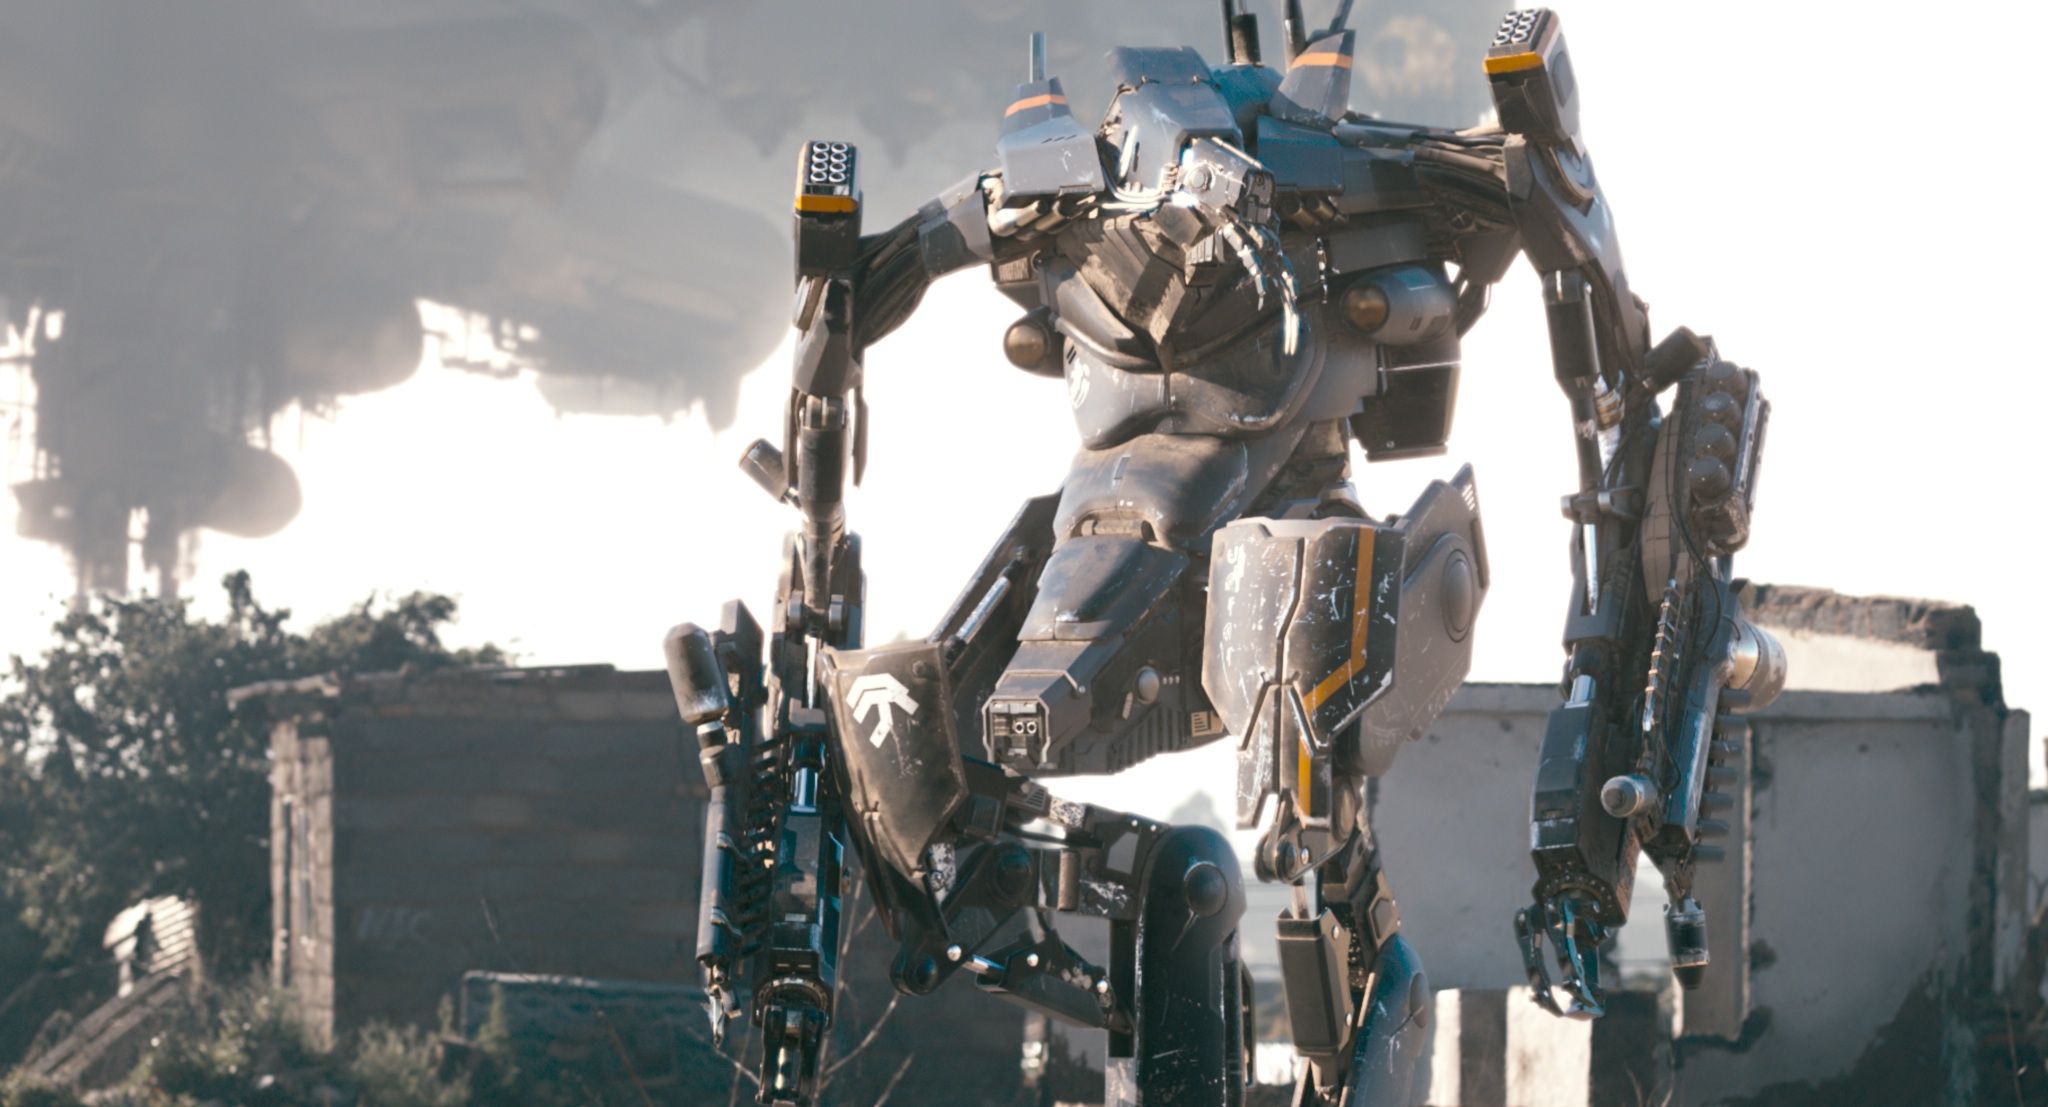 Amazing Mech Designs Hint At The Future Of Warfare (And Dogs). Alien life forms, Exosuit, Mech